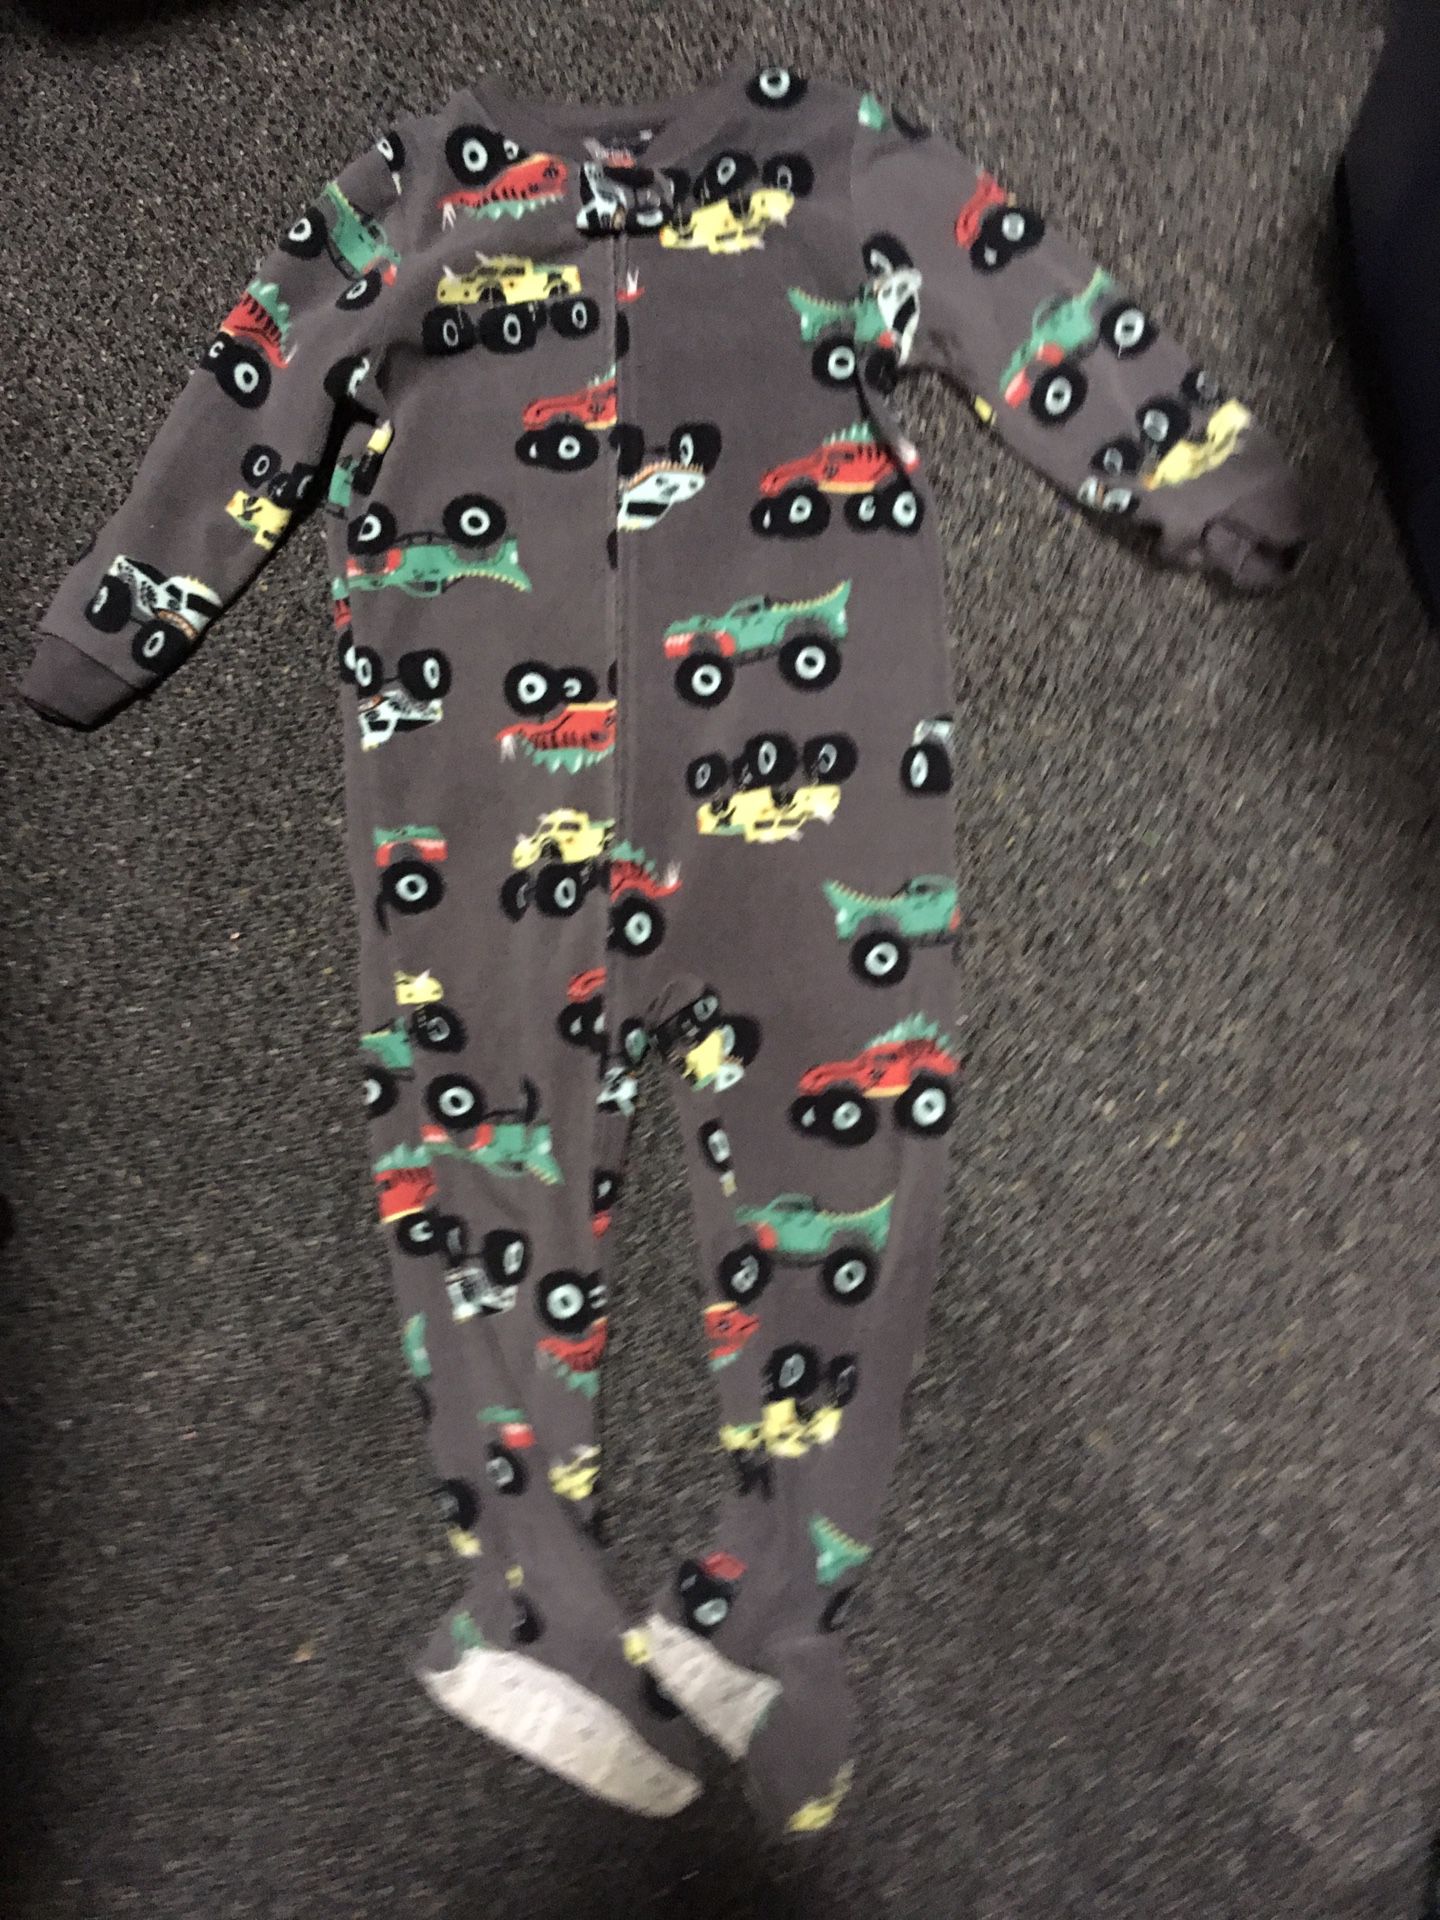 3T fleece pajamas and Olaf 2 piece - $3 each - must buy all 3 for $10 to ship